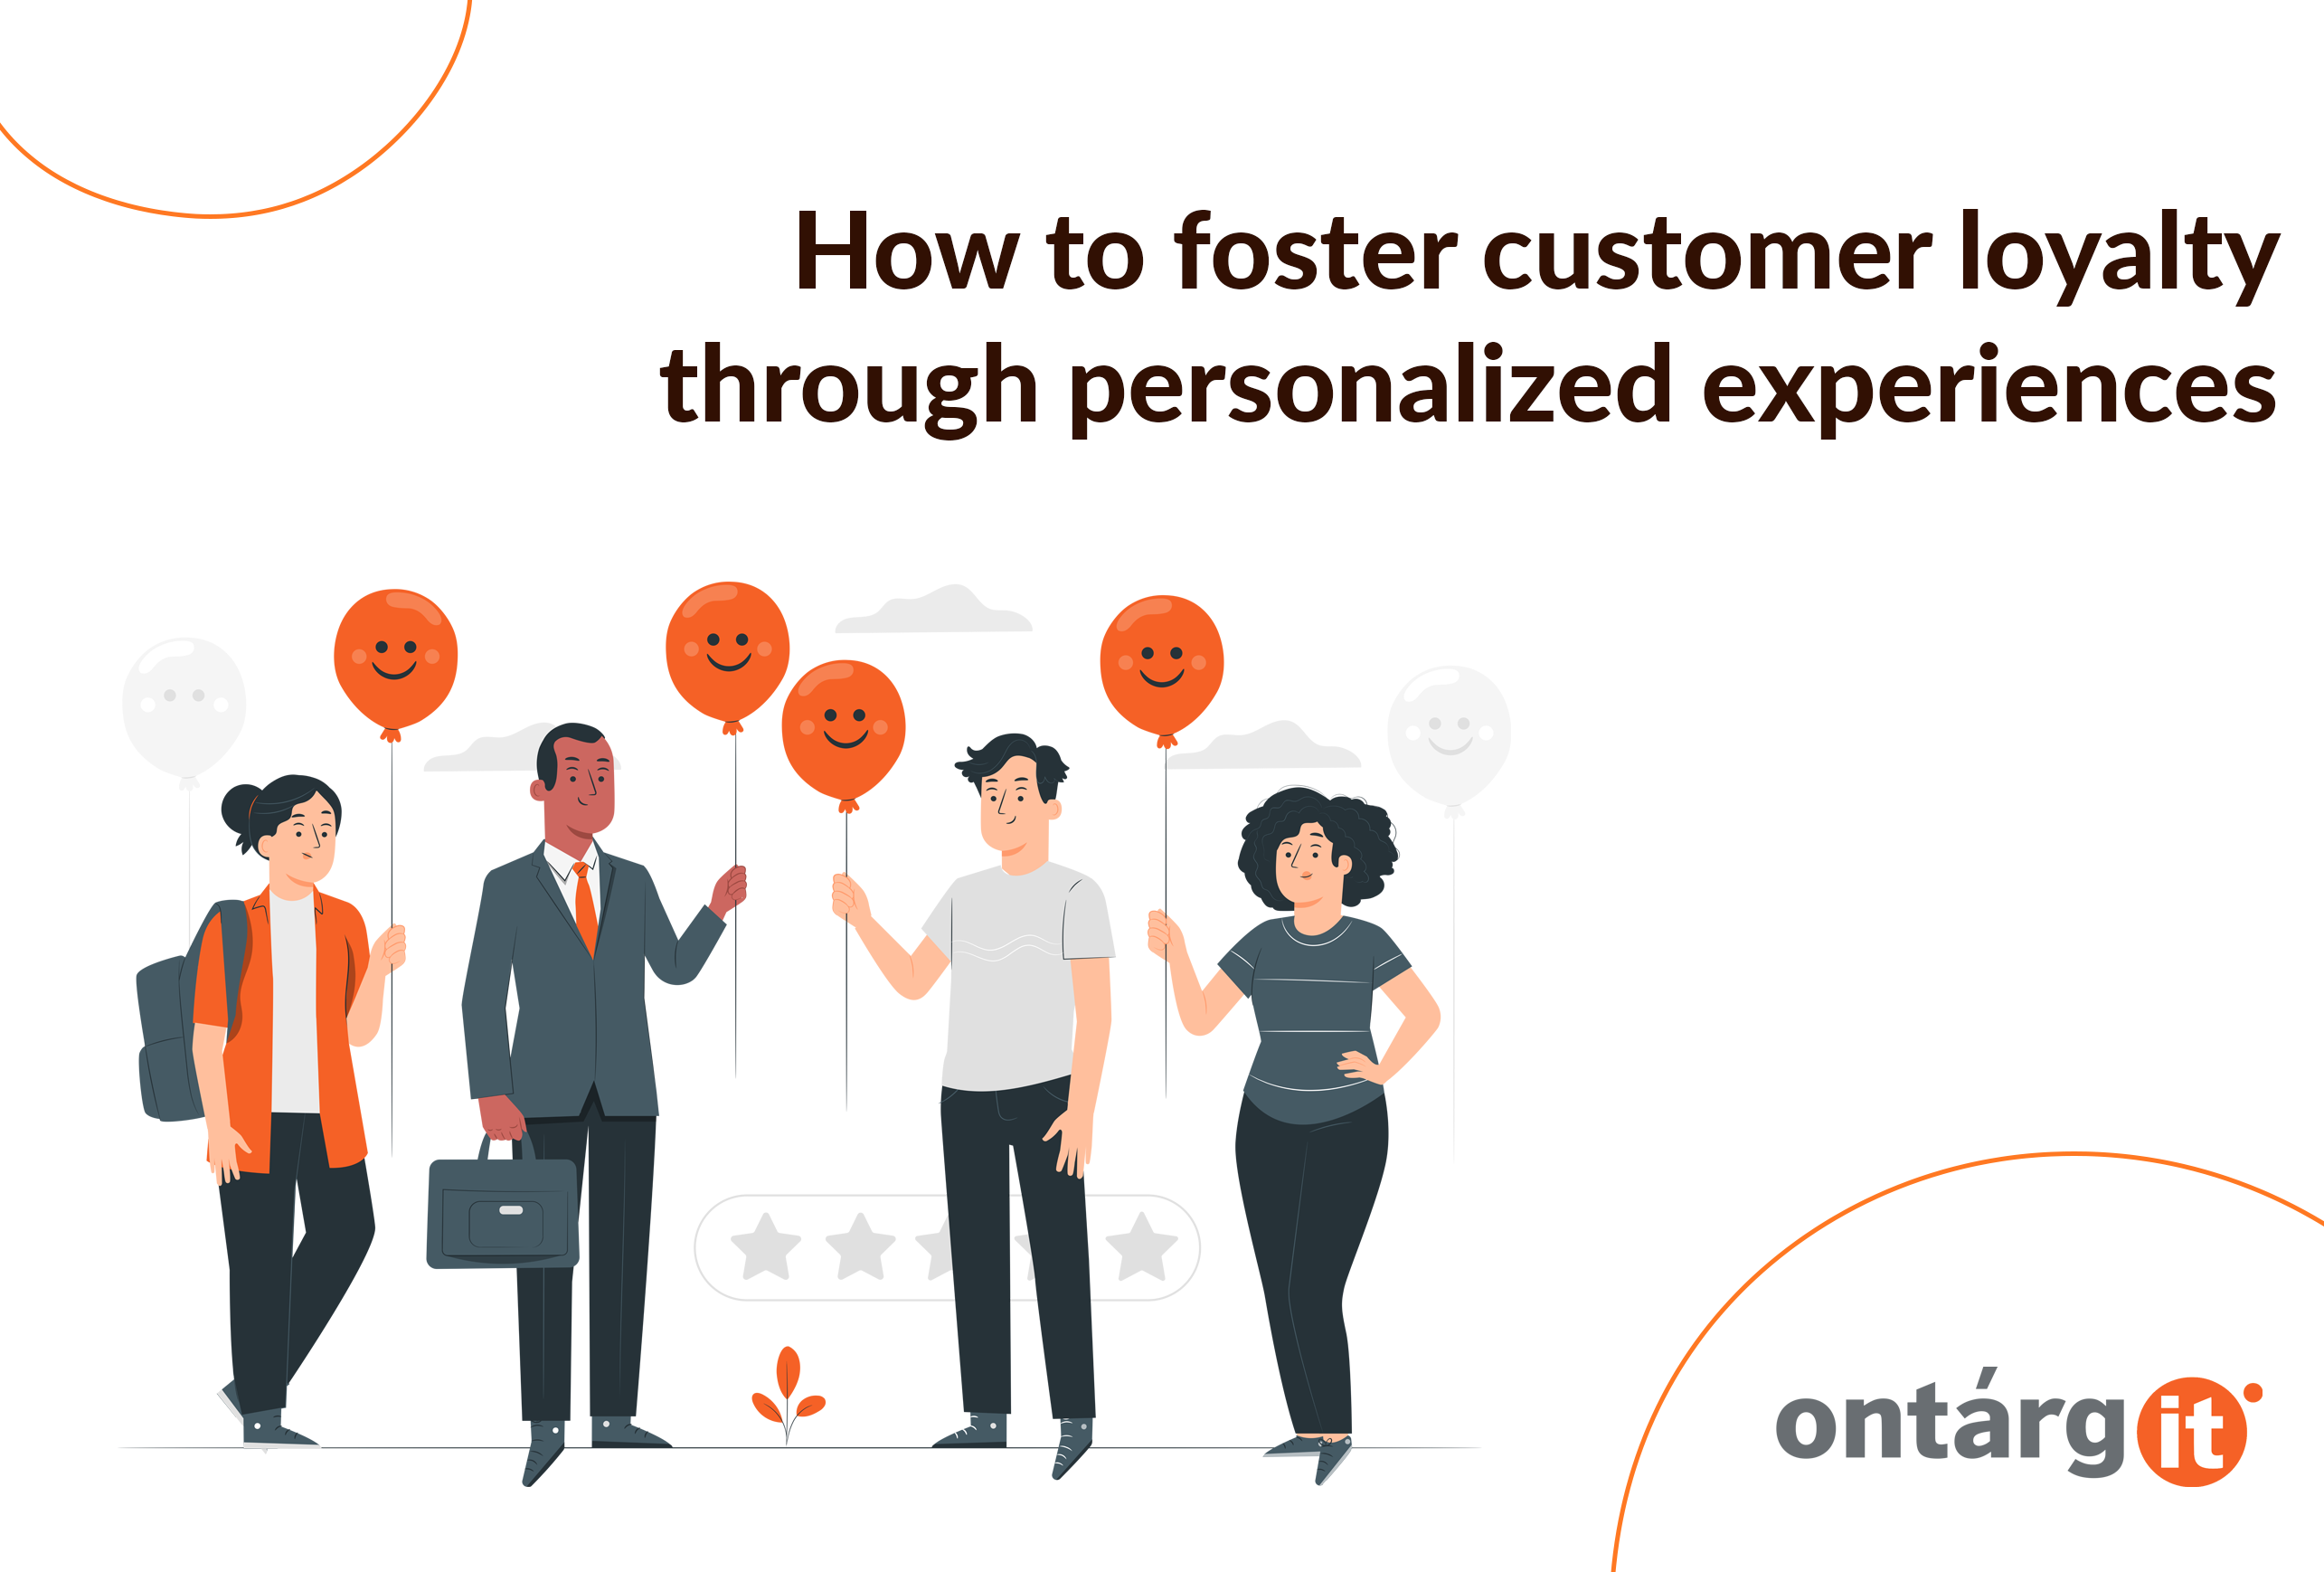 How to foster customer loyalty through personalized experiences